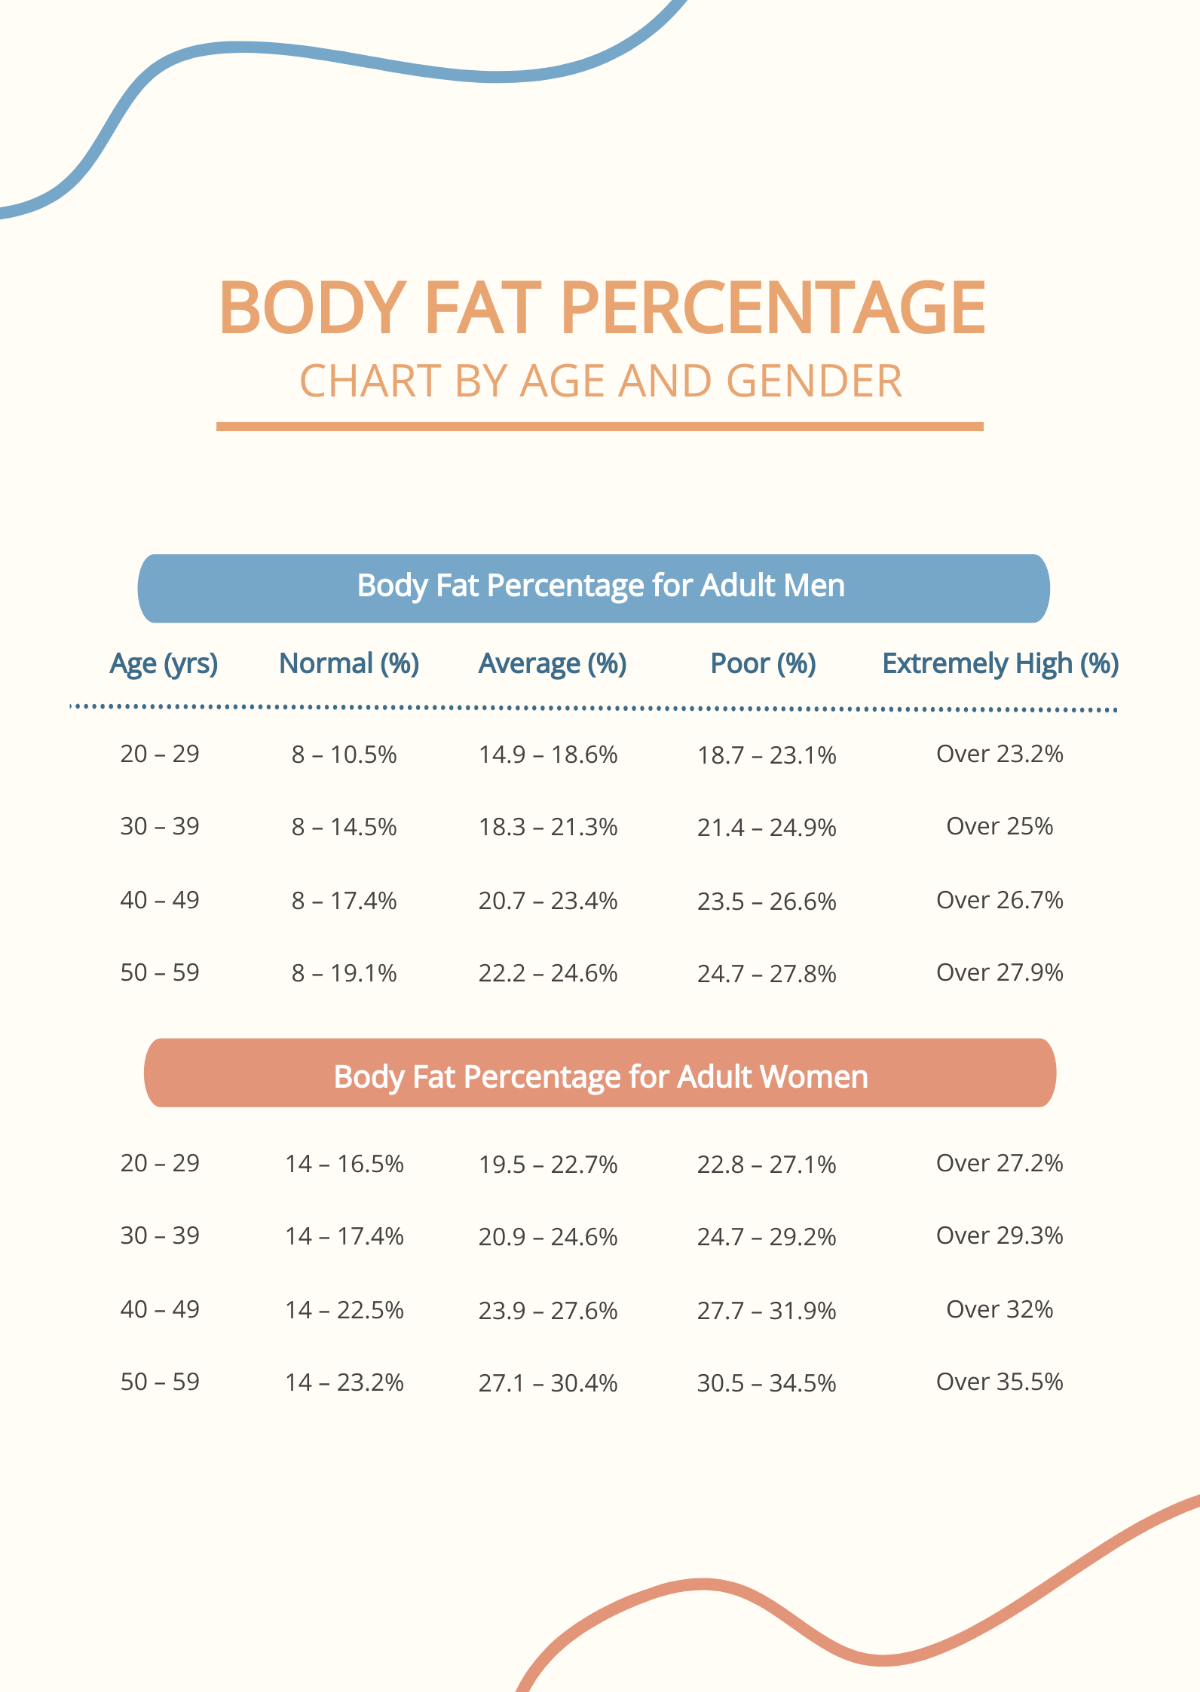 Body Fat Percentage Chart By Age And Gender Template - Edit Online ...